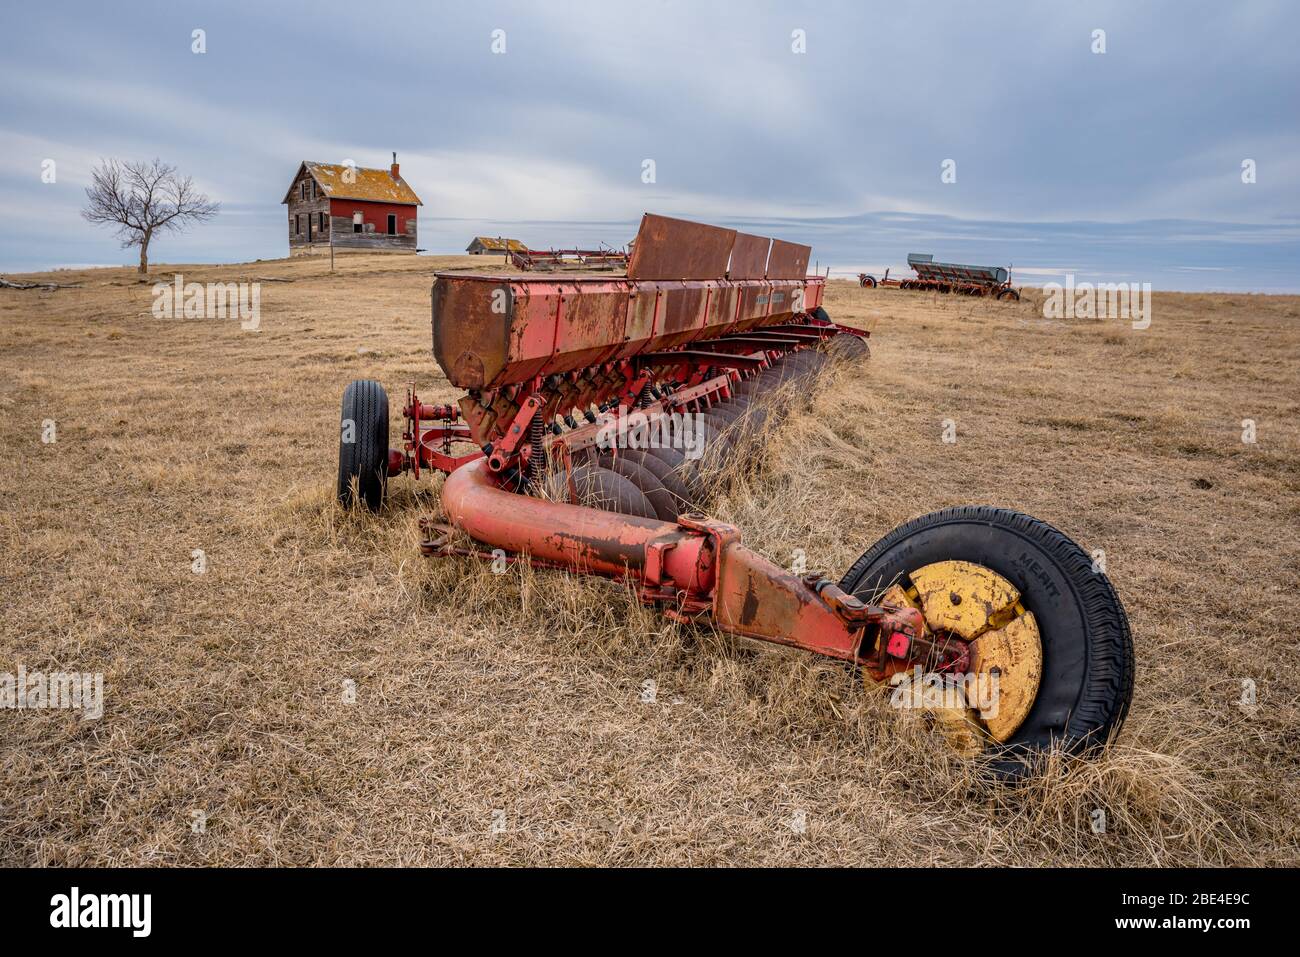 Coderre, SK- April 9, 2020: Vintage Massey-Ferguson discer abandoned in a pasture with a weathered farmhouse on a hill in Saskatchewan Stock Photo